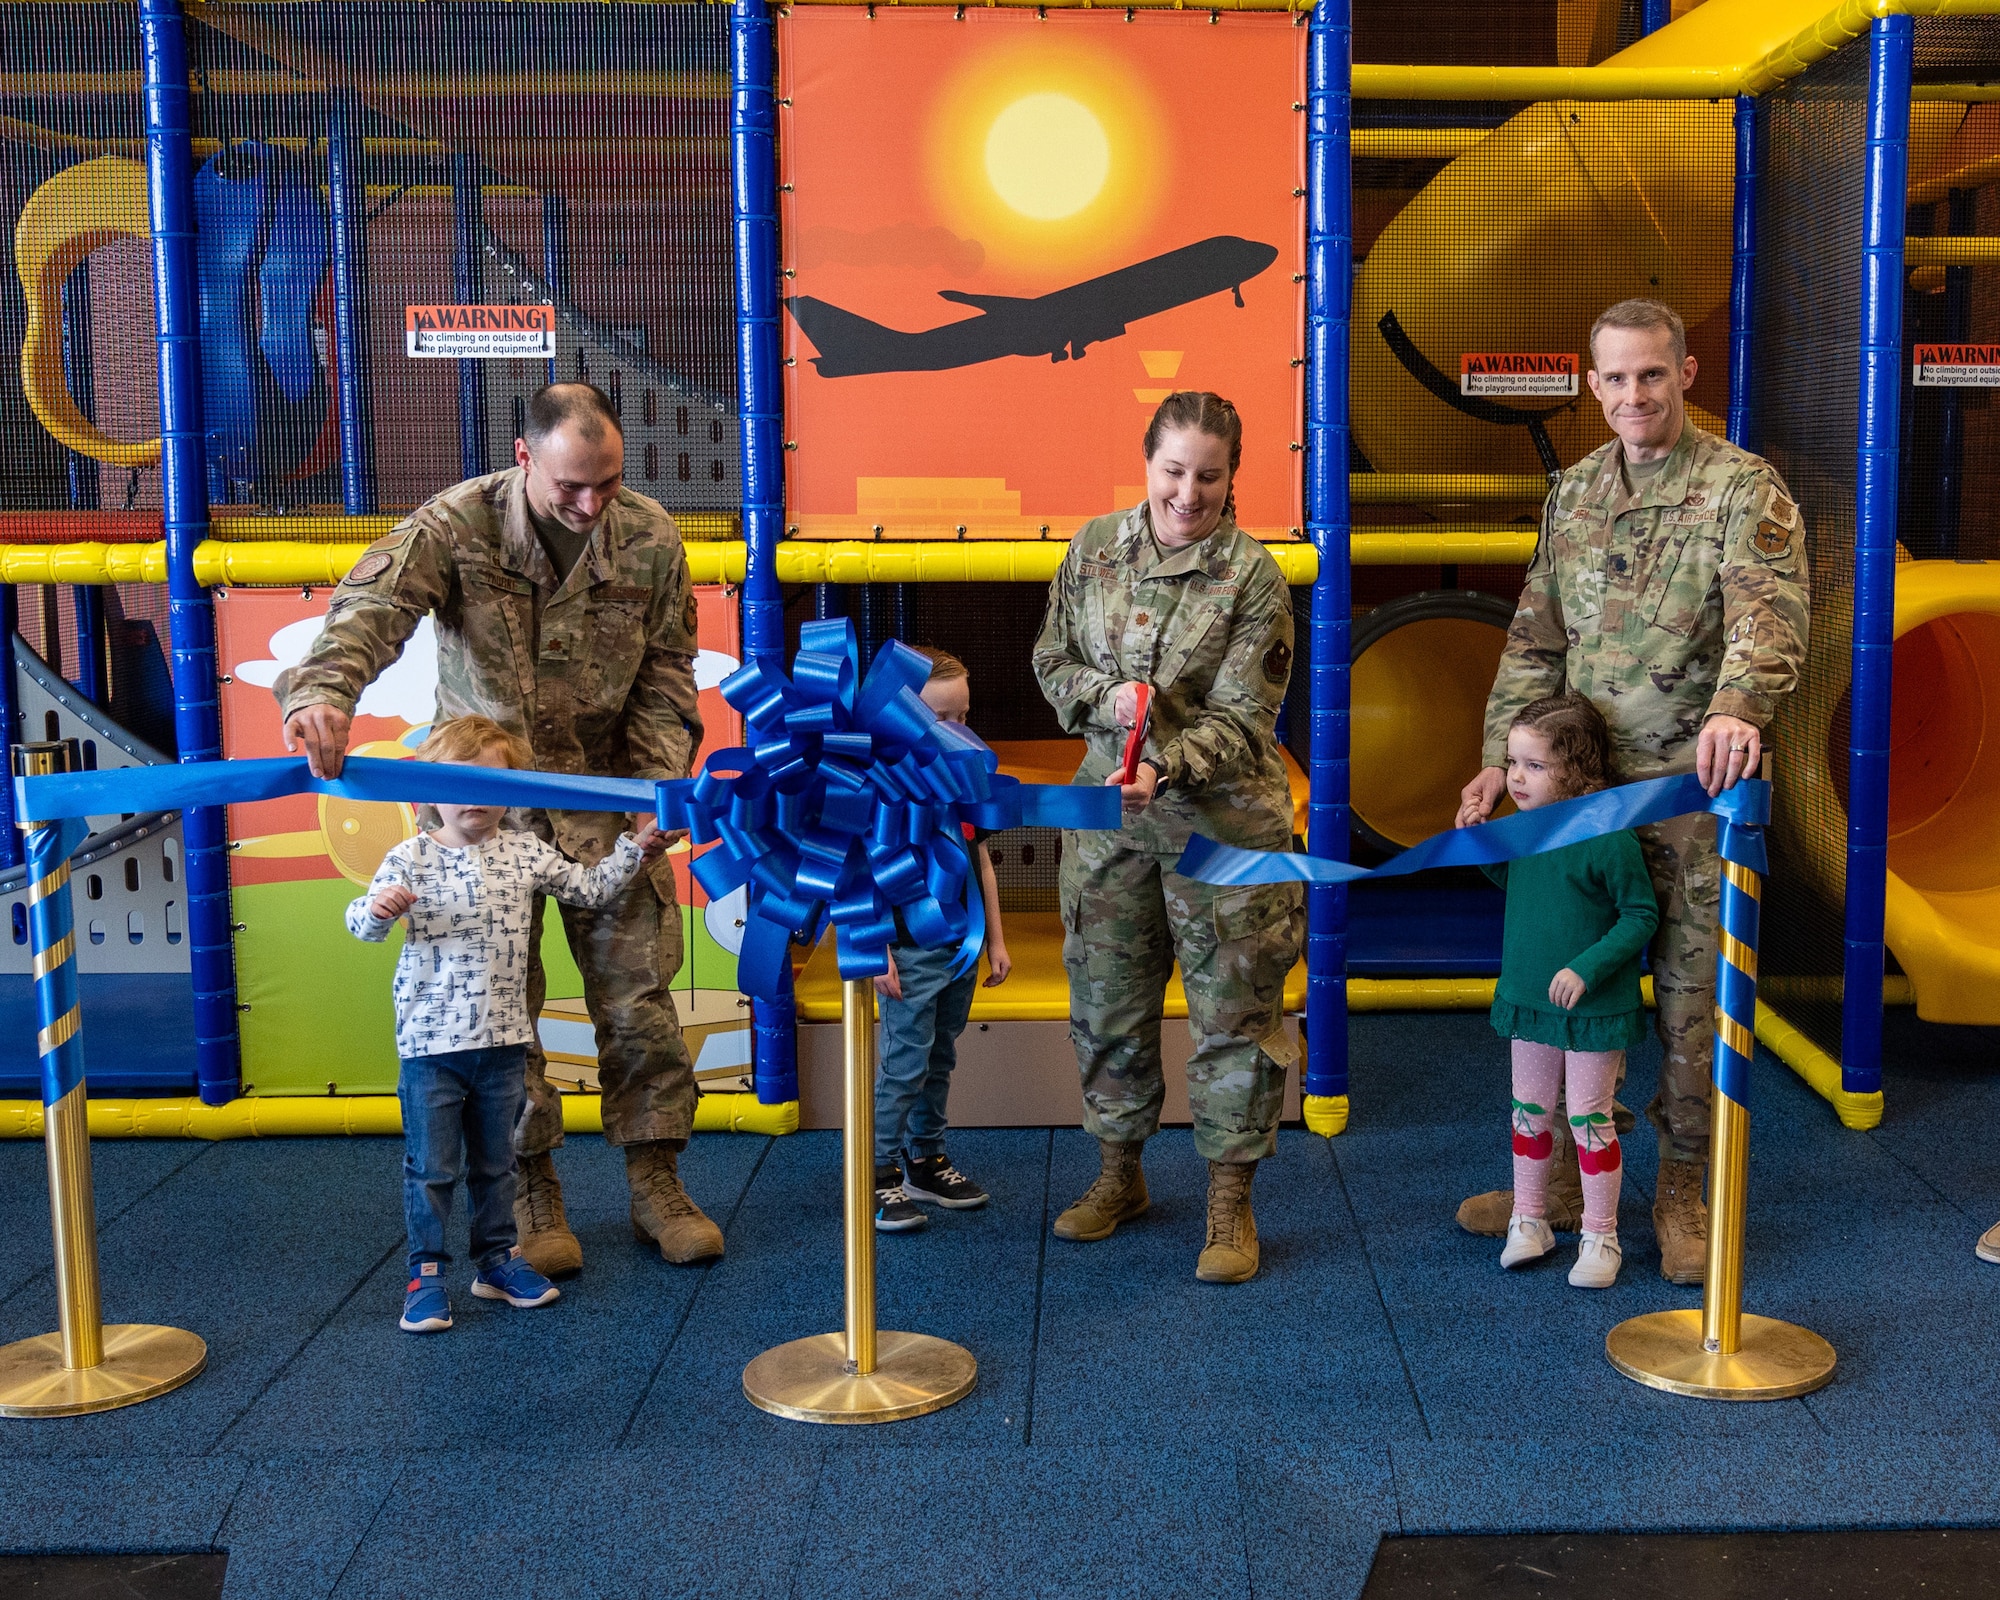 U.S. Air Force Maj. Matthew Thorne (left), 47th Contracting Squadron commander, Maj. Kayleigh Stilwell (center), 47th Force Support Squadron (FSS) commander, and Lt. Col. John Casey (right), 47th Civil Engineer Squadron commander, officially open the indoor playground at the Losano Fitness Center at Laughlin Air Force Base, Texas, Jan. 20, 2024. The new indoor playground offers a climate-controlled area for children to play during the summer months where temperatures can reach 100+ degrees for weeks at a time. Fitness is an important part of the 47th Flying Training Wing’s priorities, allowing for easier access for parents and improving the quality of life for Airmen exercising promotes physical readiness. (U.S. Air Force photo by Staff Sgt. Nicholas Larsen)